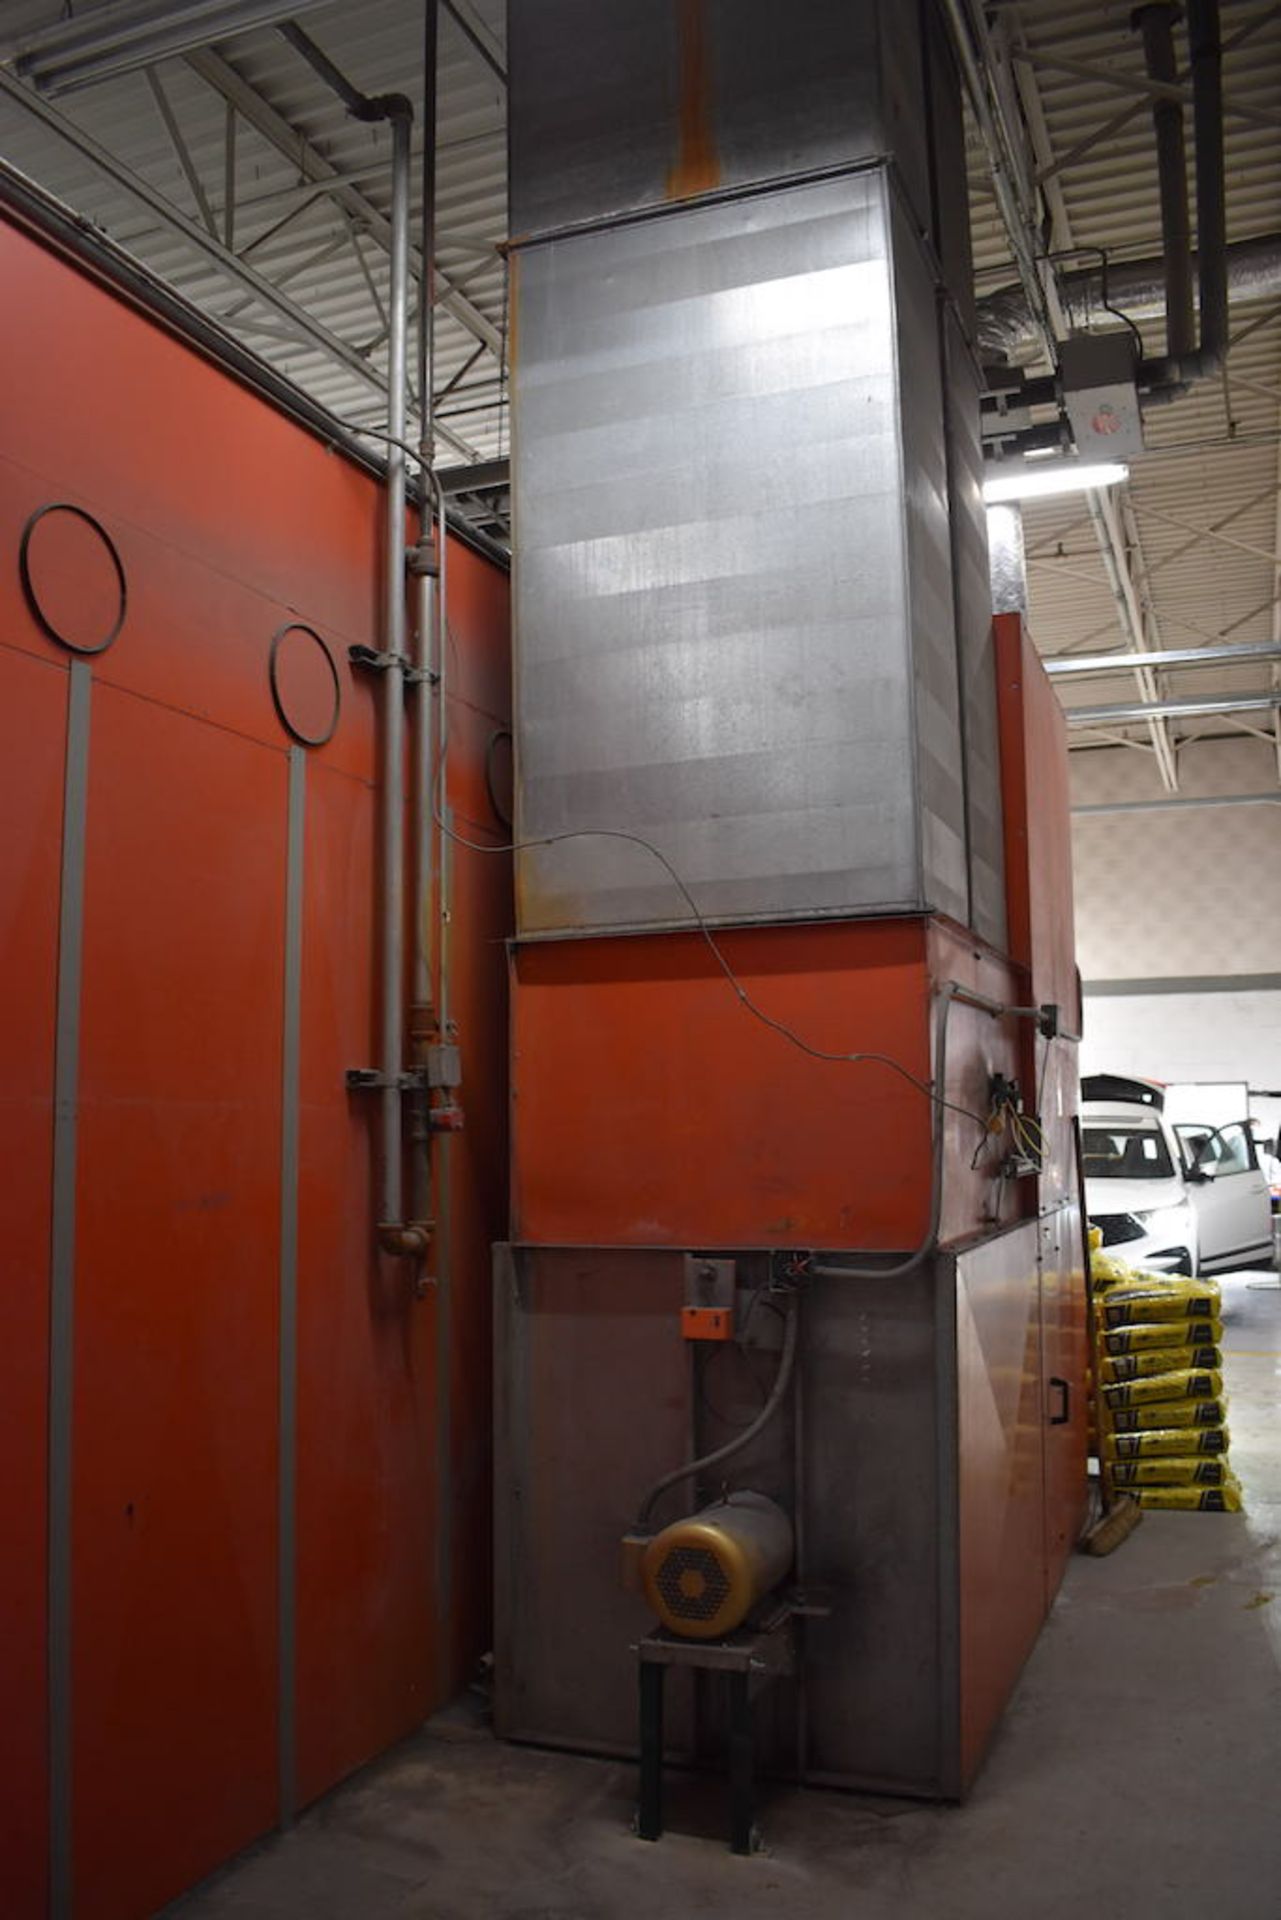 BLOWTHERM MODEL EP-750 DOWNDRAFT HEATED DRIVE-IN SPRAY BOOTH: - Image 6 of 7